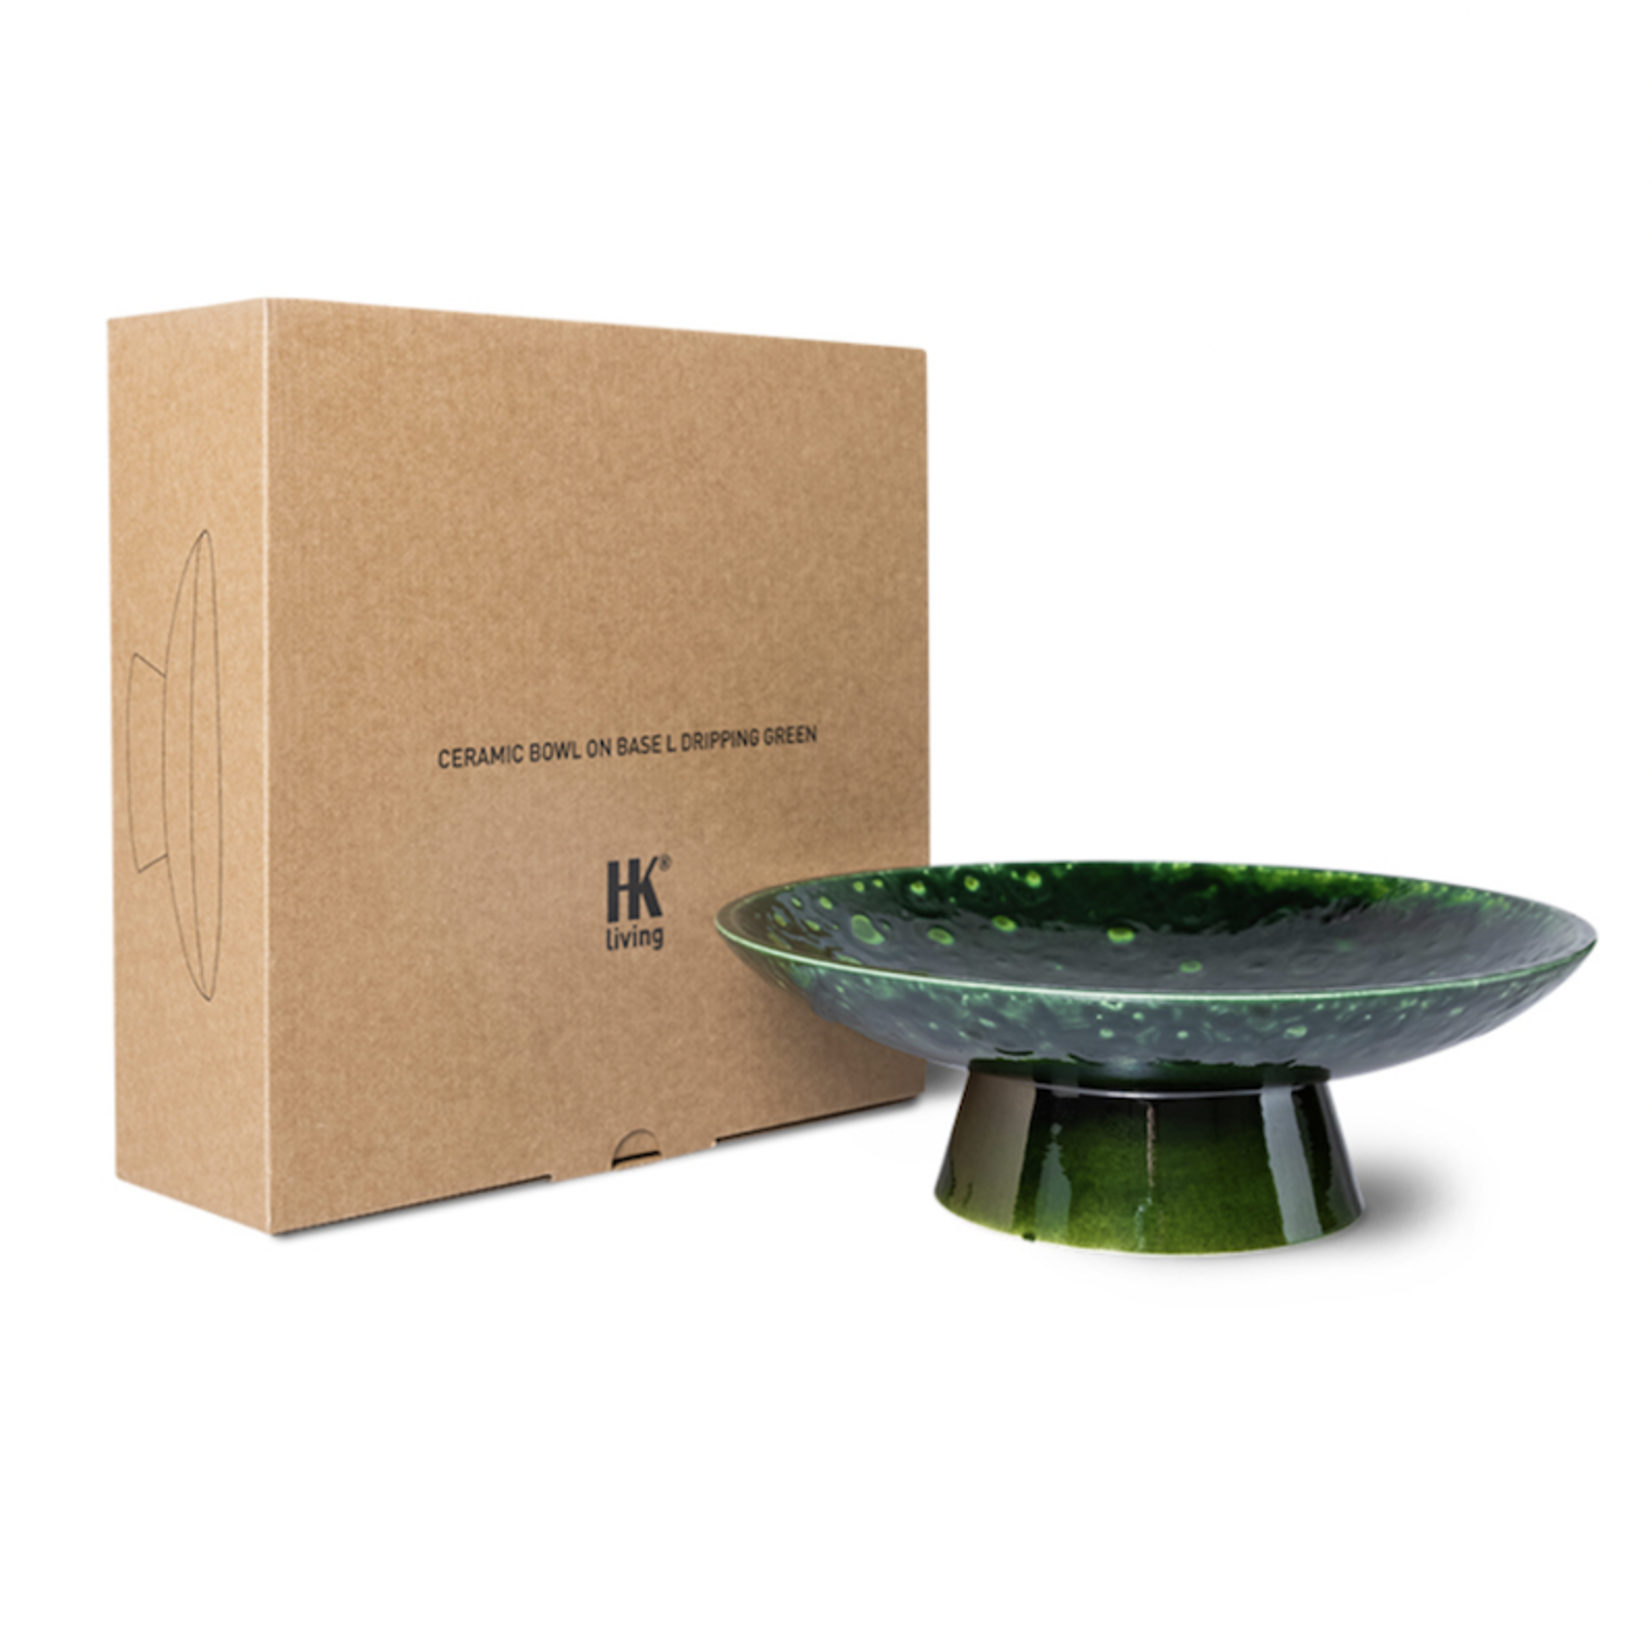 HKliving bowl on base - dripping green the emeralds